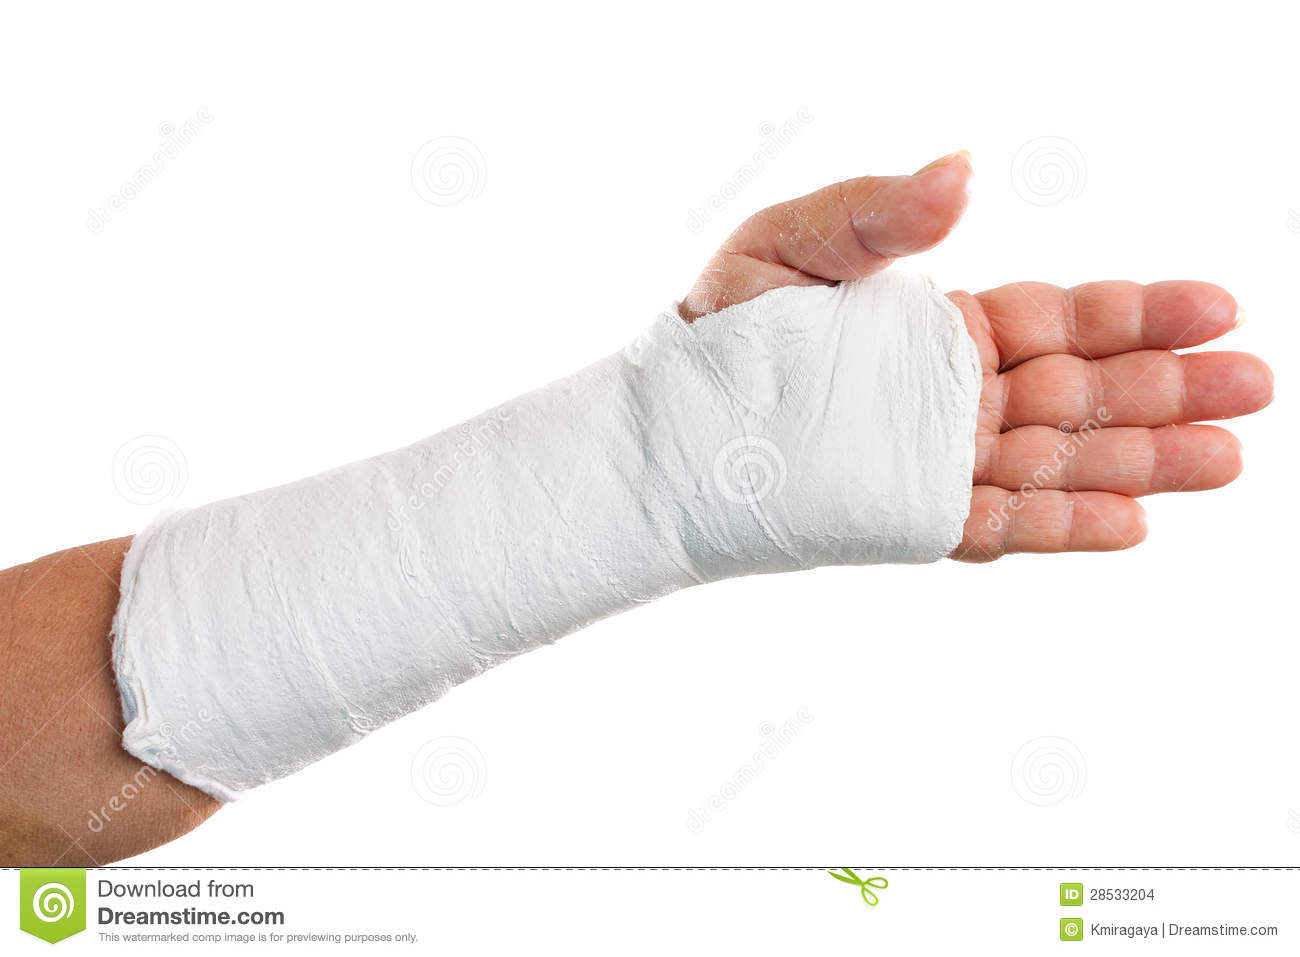 Broken Arm With A Plaster Cast Stock Images   Image  28533204